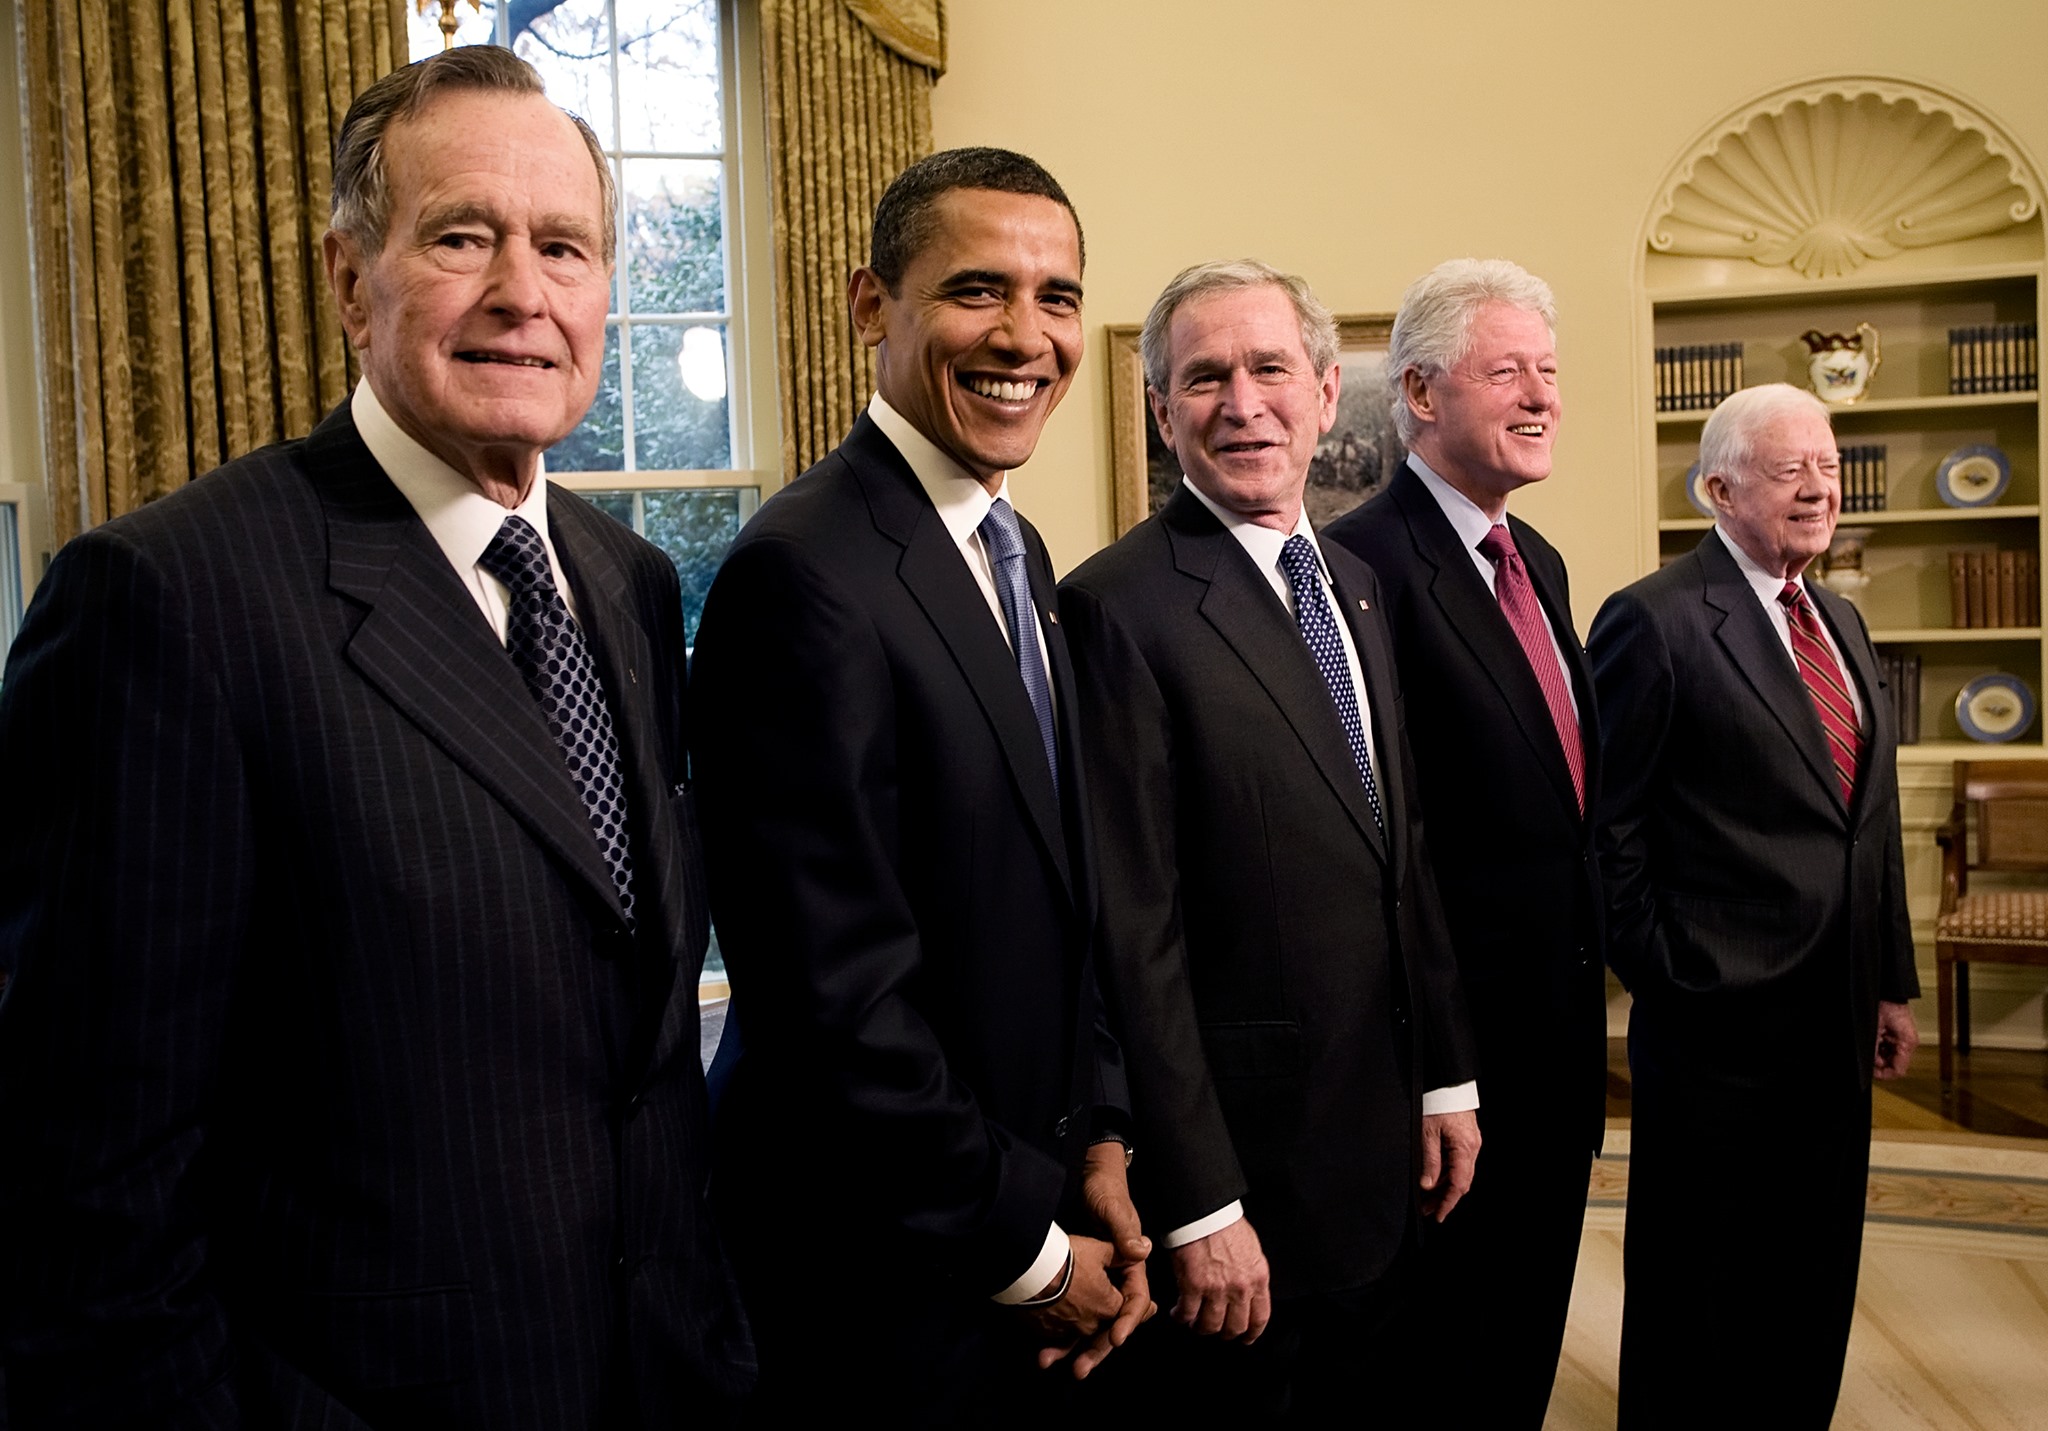 George H.W. Bush, Barack Obama, George W. Bush, Bill Clinton and Jimmy Carter, United States Presidents Gather Two Weeks before Barack Obama's Inauguration, Oval Office of the White House, Washington, D.C.